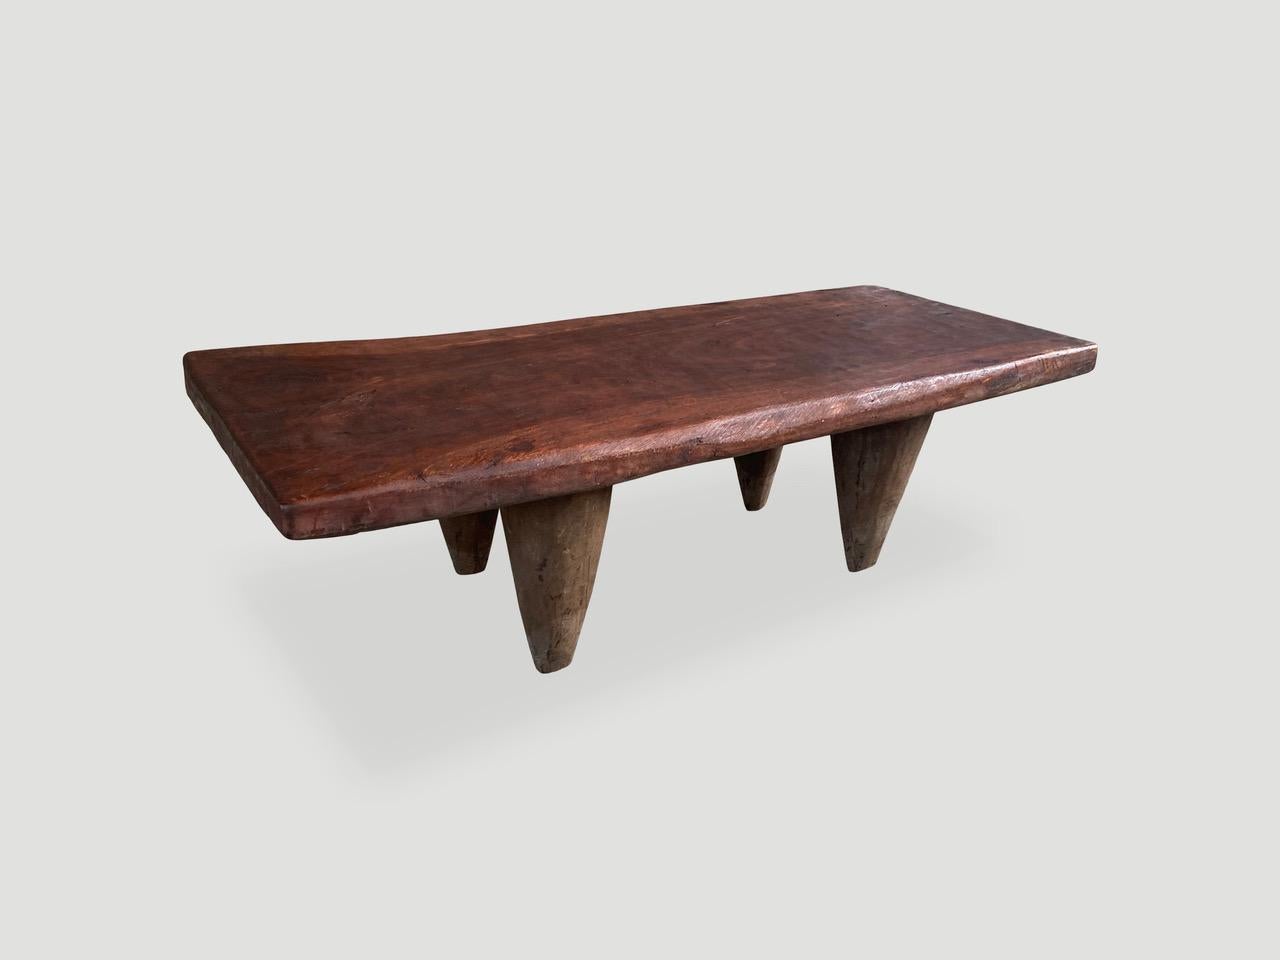 Antique coffee table or bench hand carved by the Senufo tribes from a single block of iroko wood, native to the west coast of Africa. The wood is tough, dense and very durable. Shown with cone style legs and with a two inch thick top. We only source